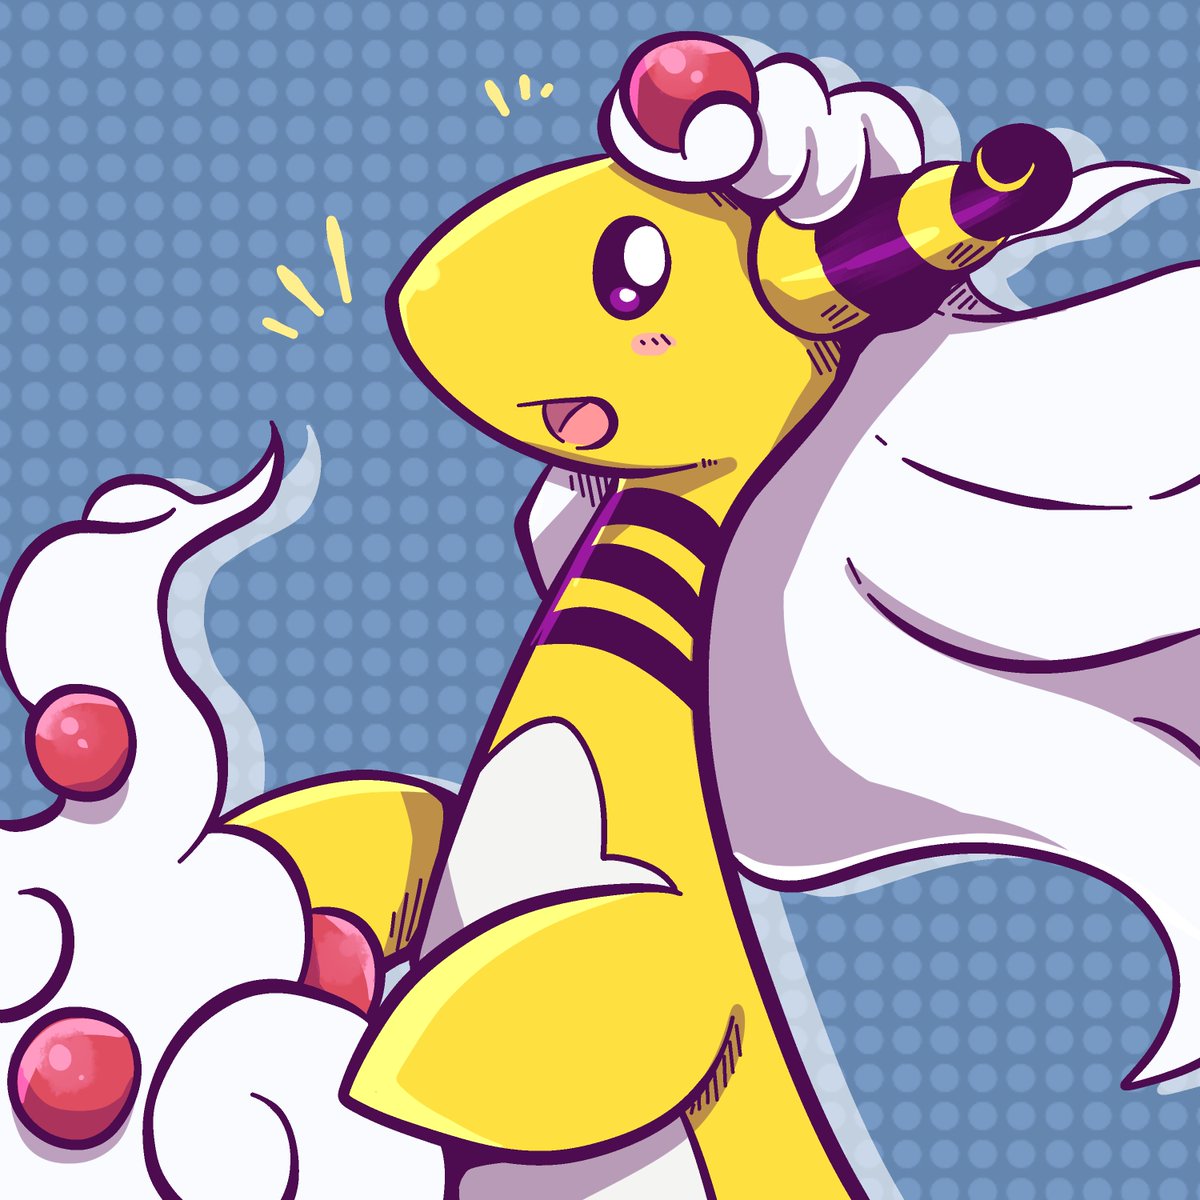 Here's the Ampharos line and I wanted to include the majestic mega amp...